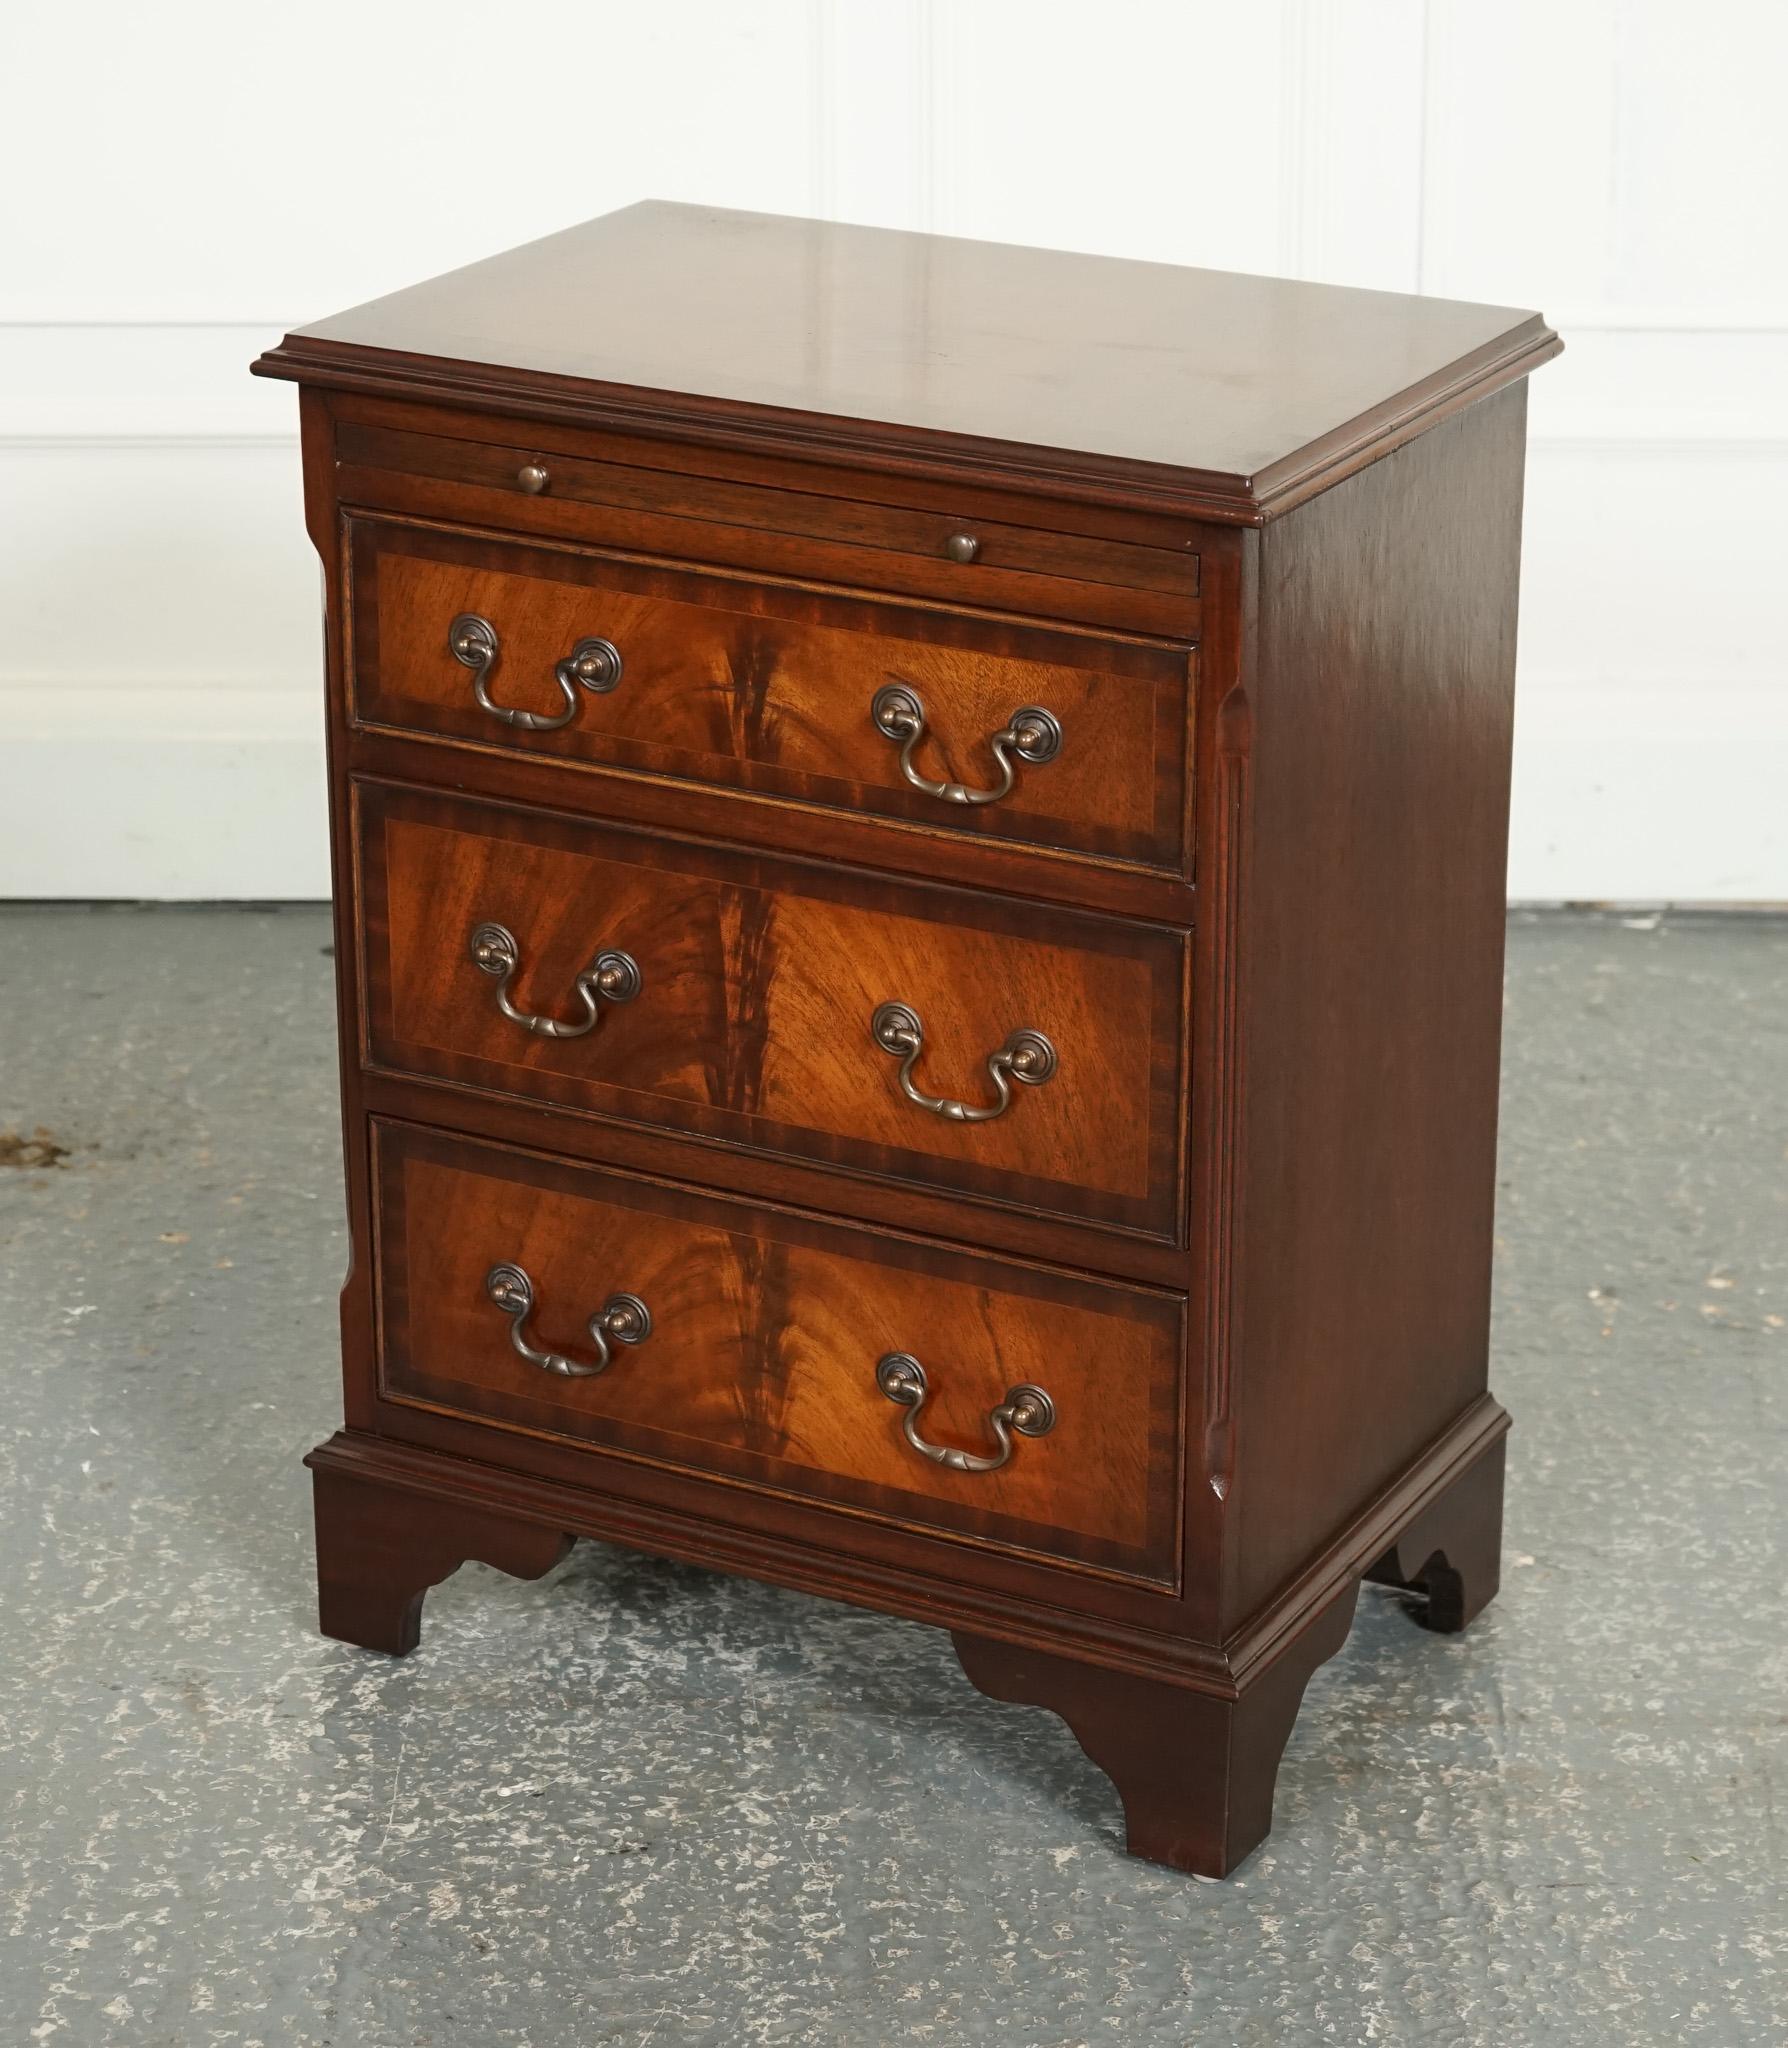 British LOVELY GEORGIAN STYLE SMALL CHEST OF DRAWERS SiDE TABLE WITH BUTLER TRAY J1 For Sale